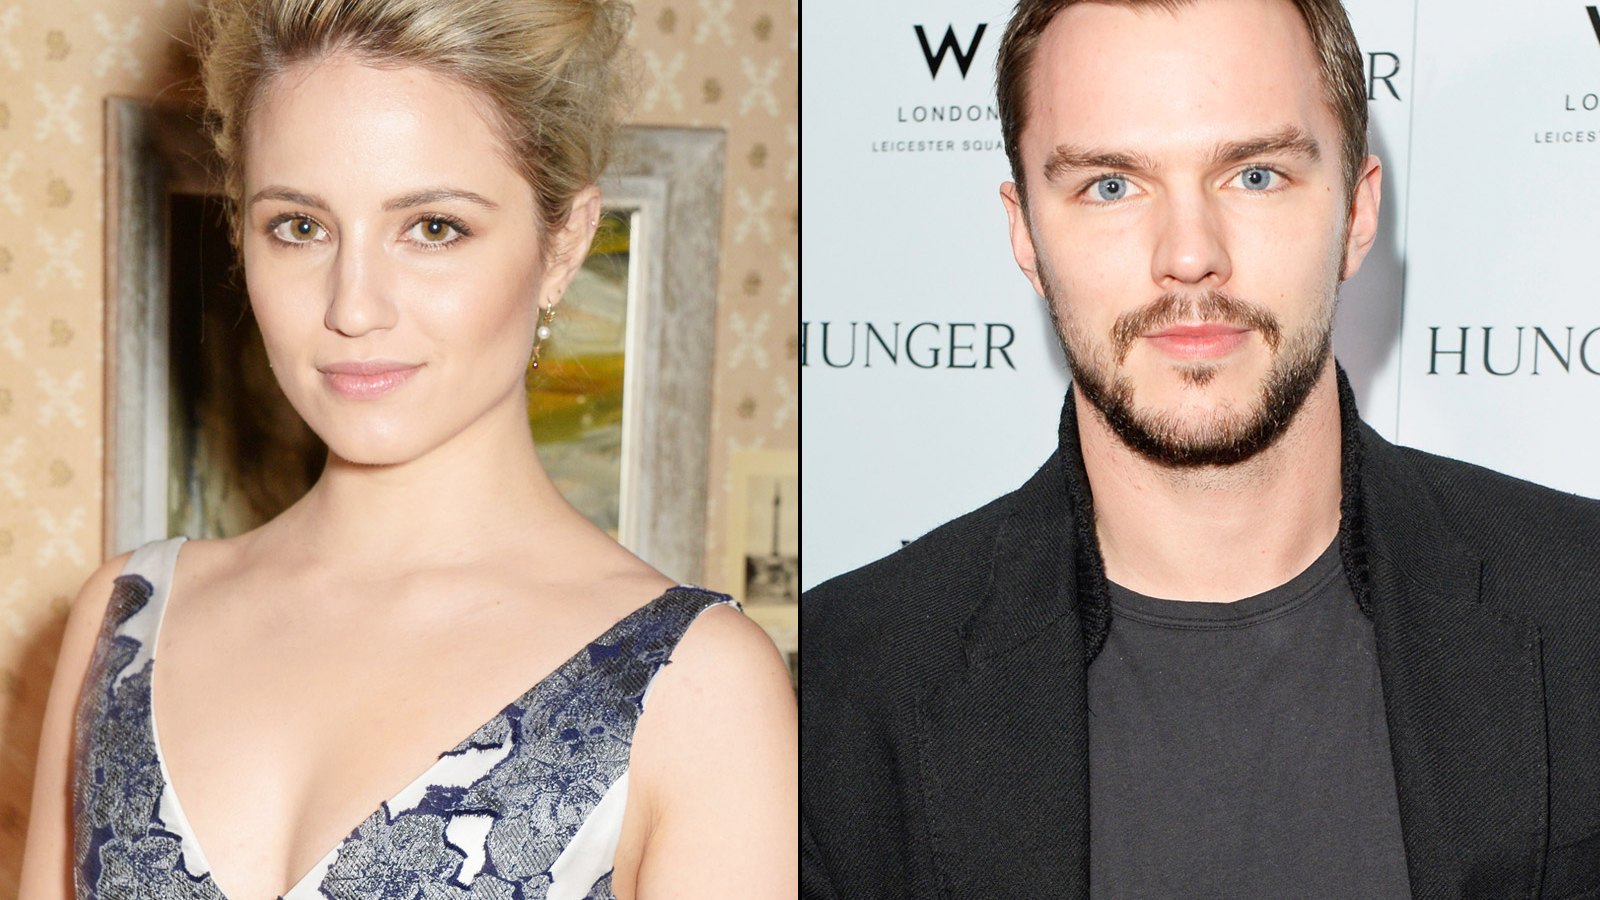 Dianna Agron and Nicholas Hoult